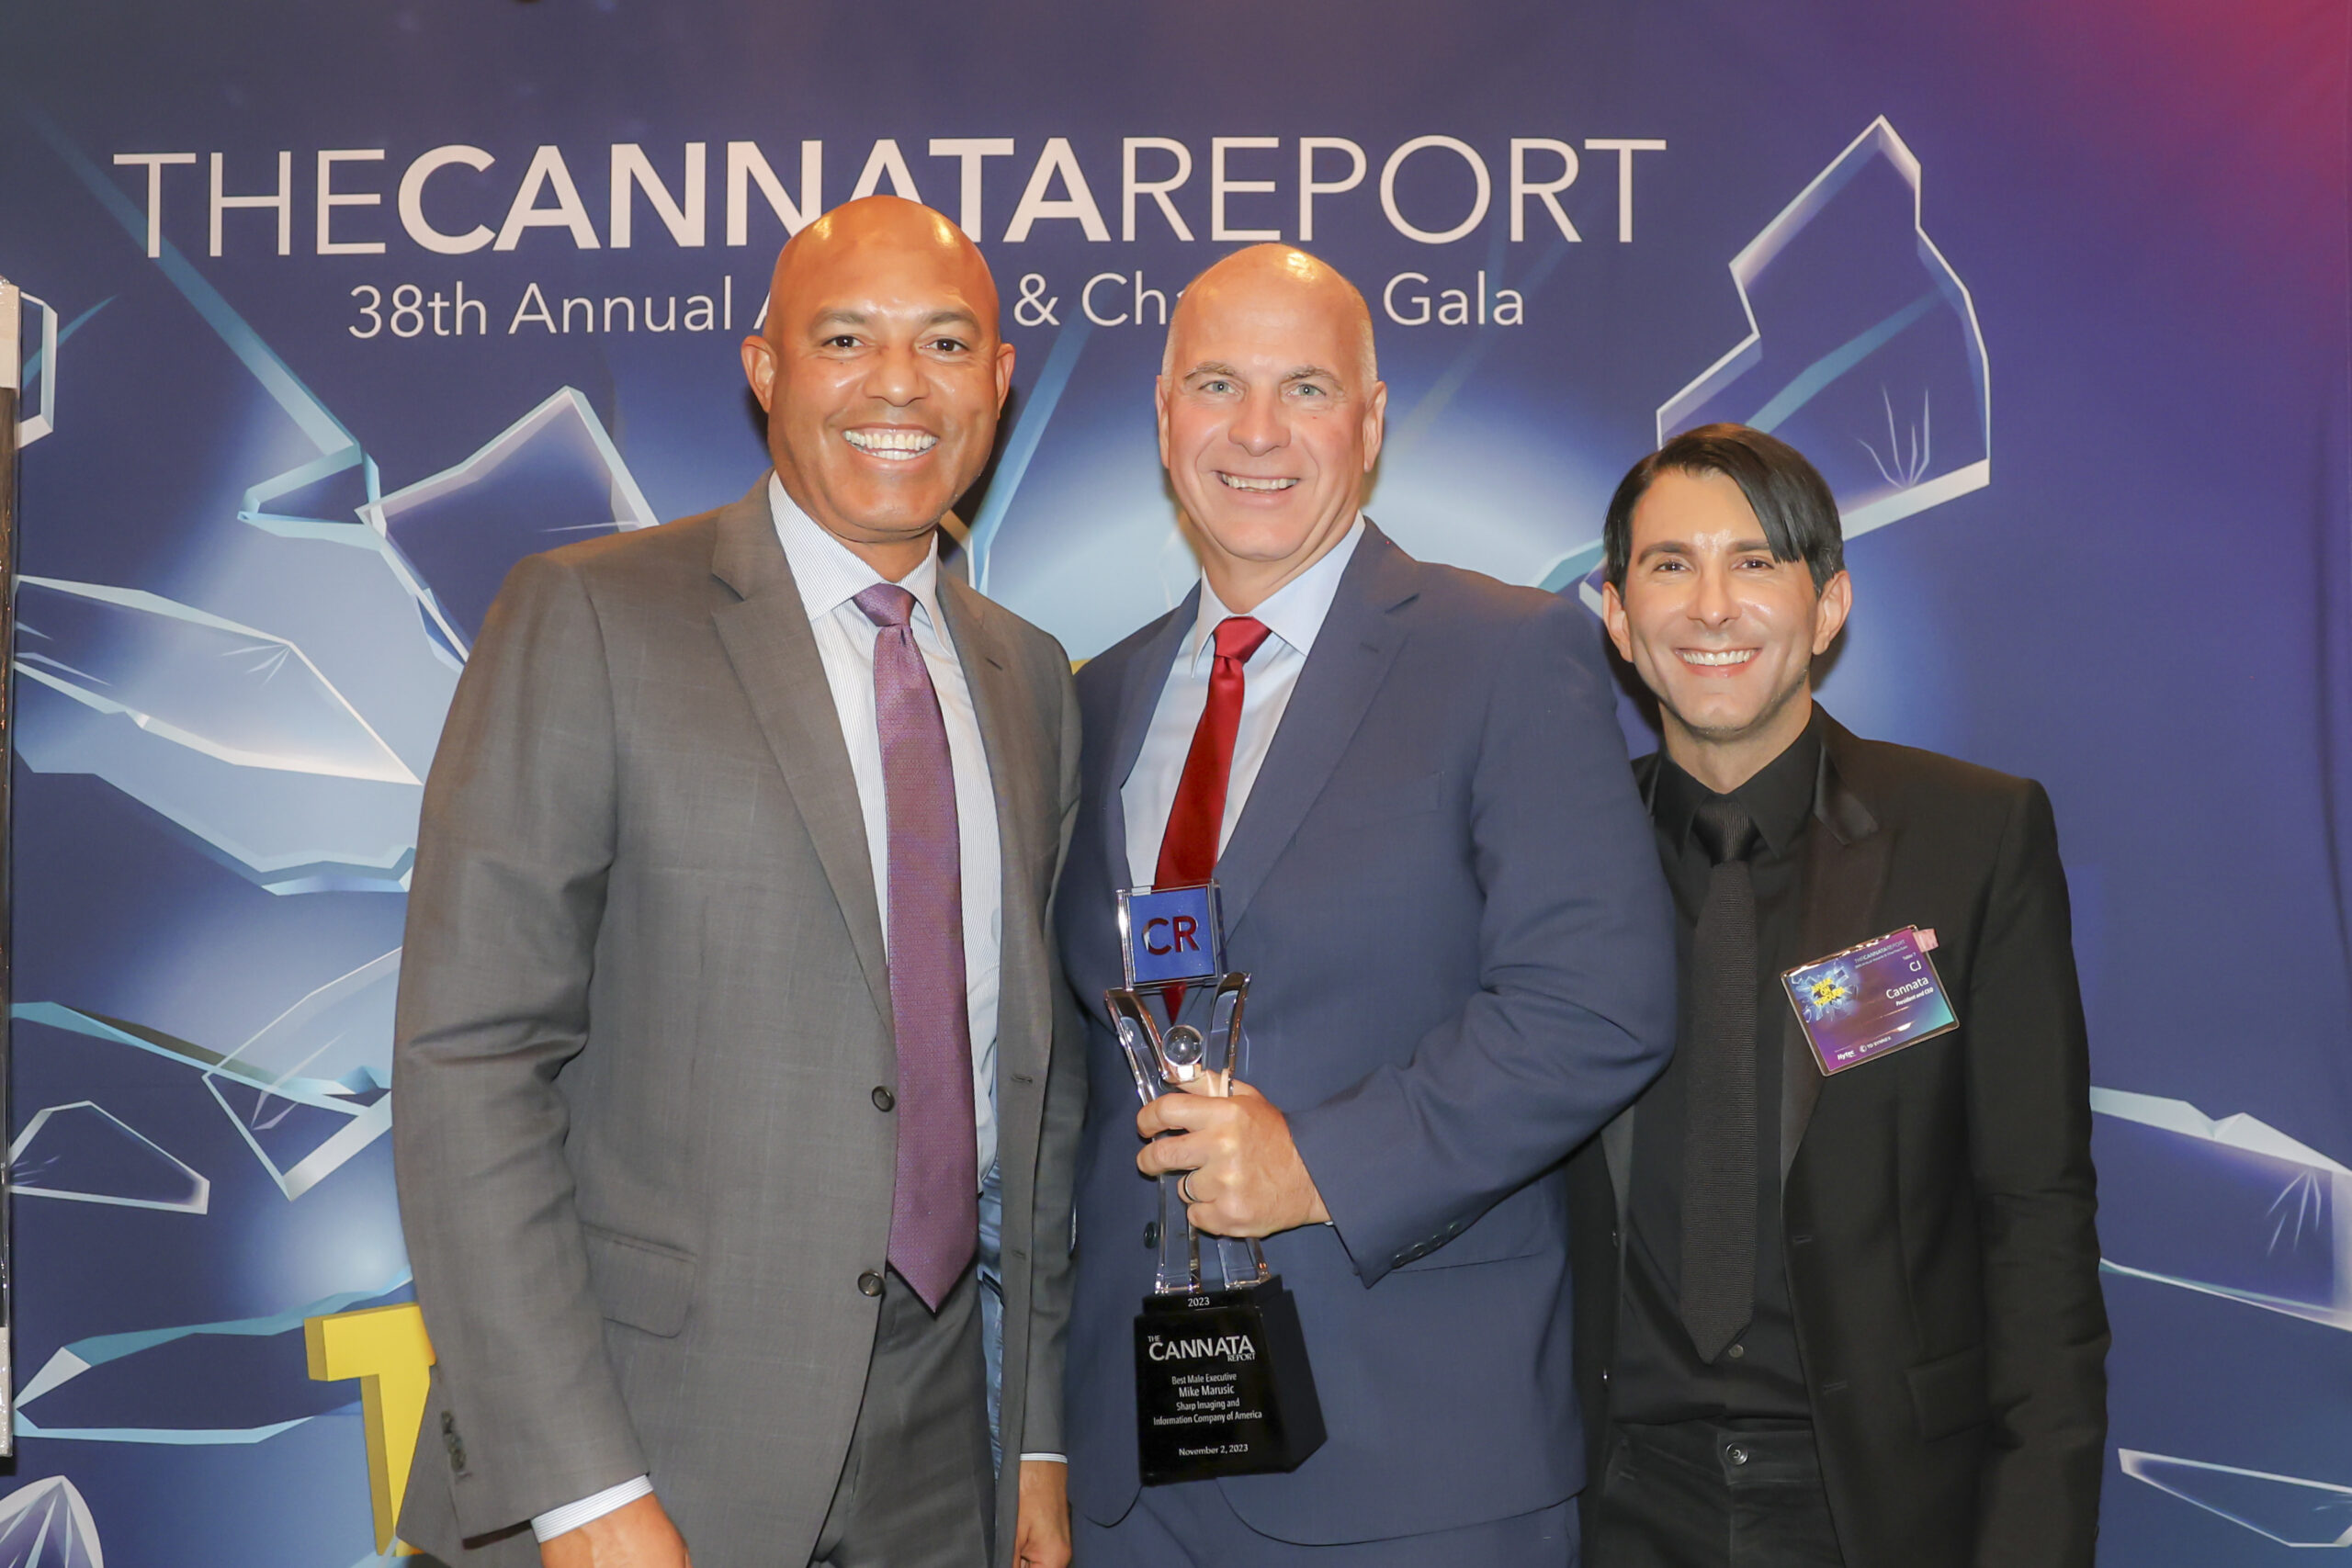 The Cannata Report Raises Funds for The Mariano Rivera Foundation at its 38th Annual Awards & Charities Gala